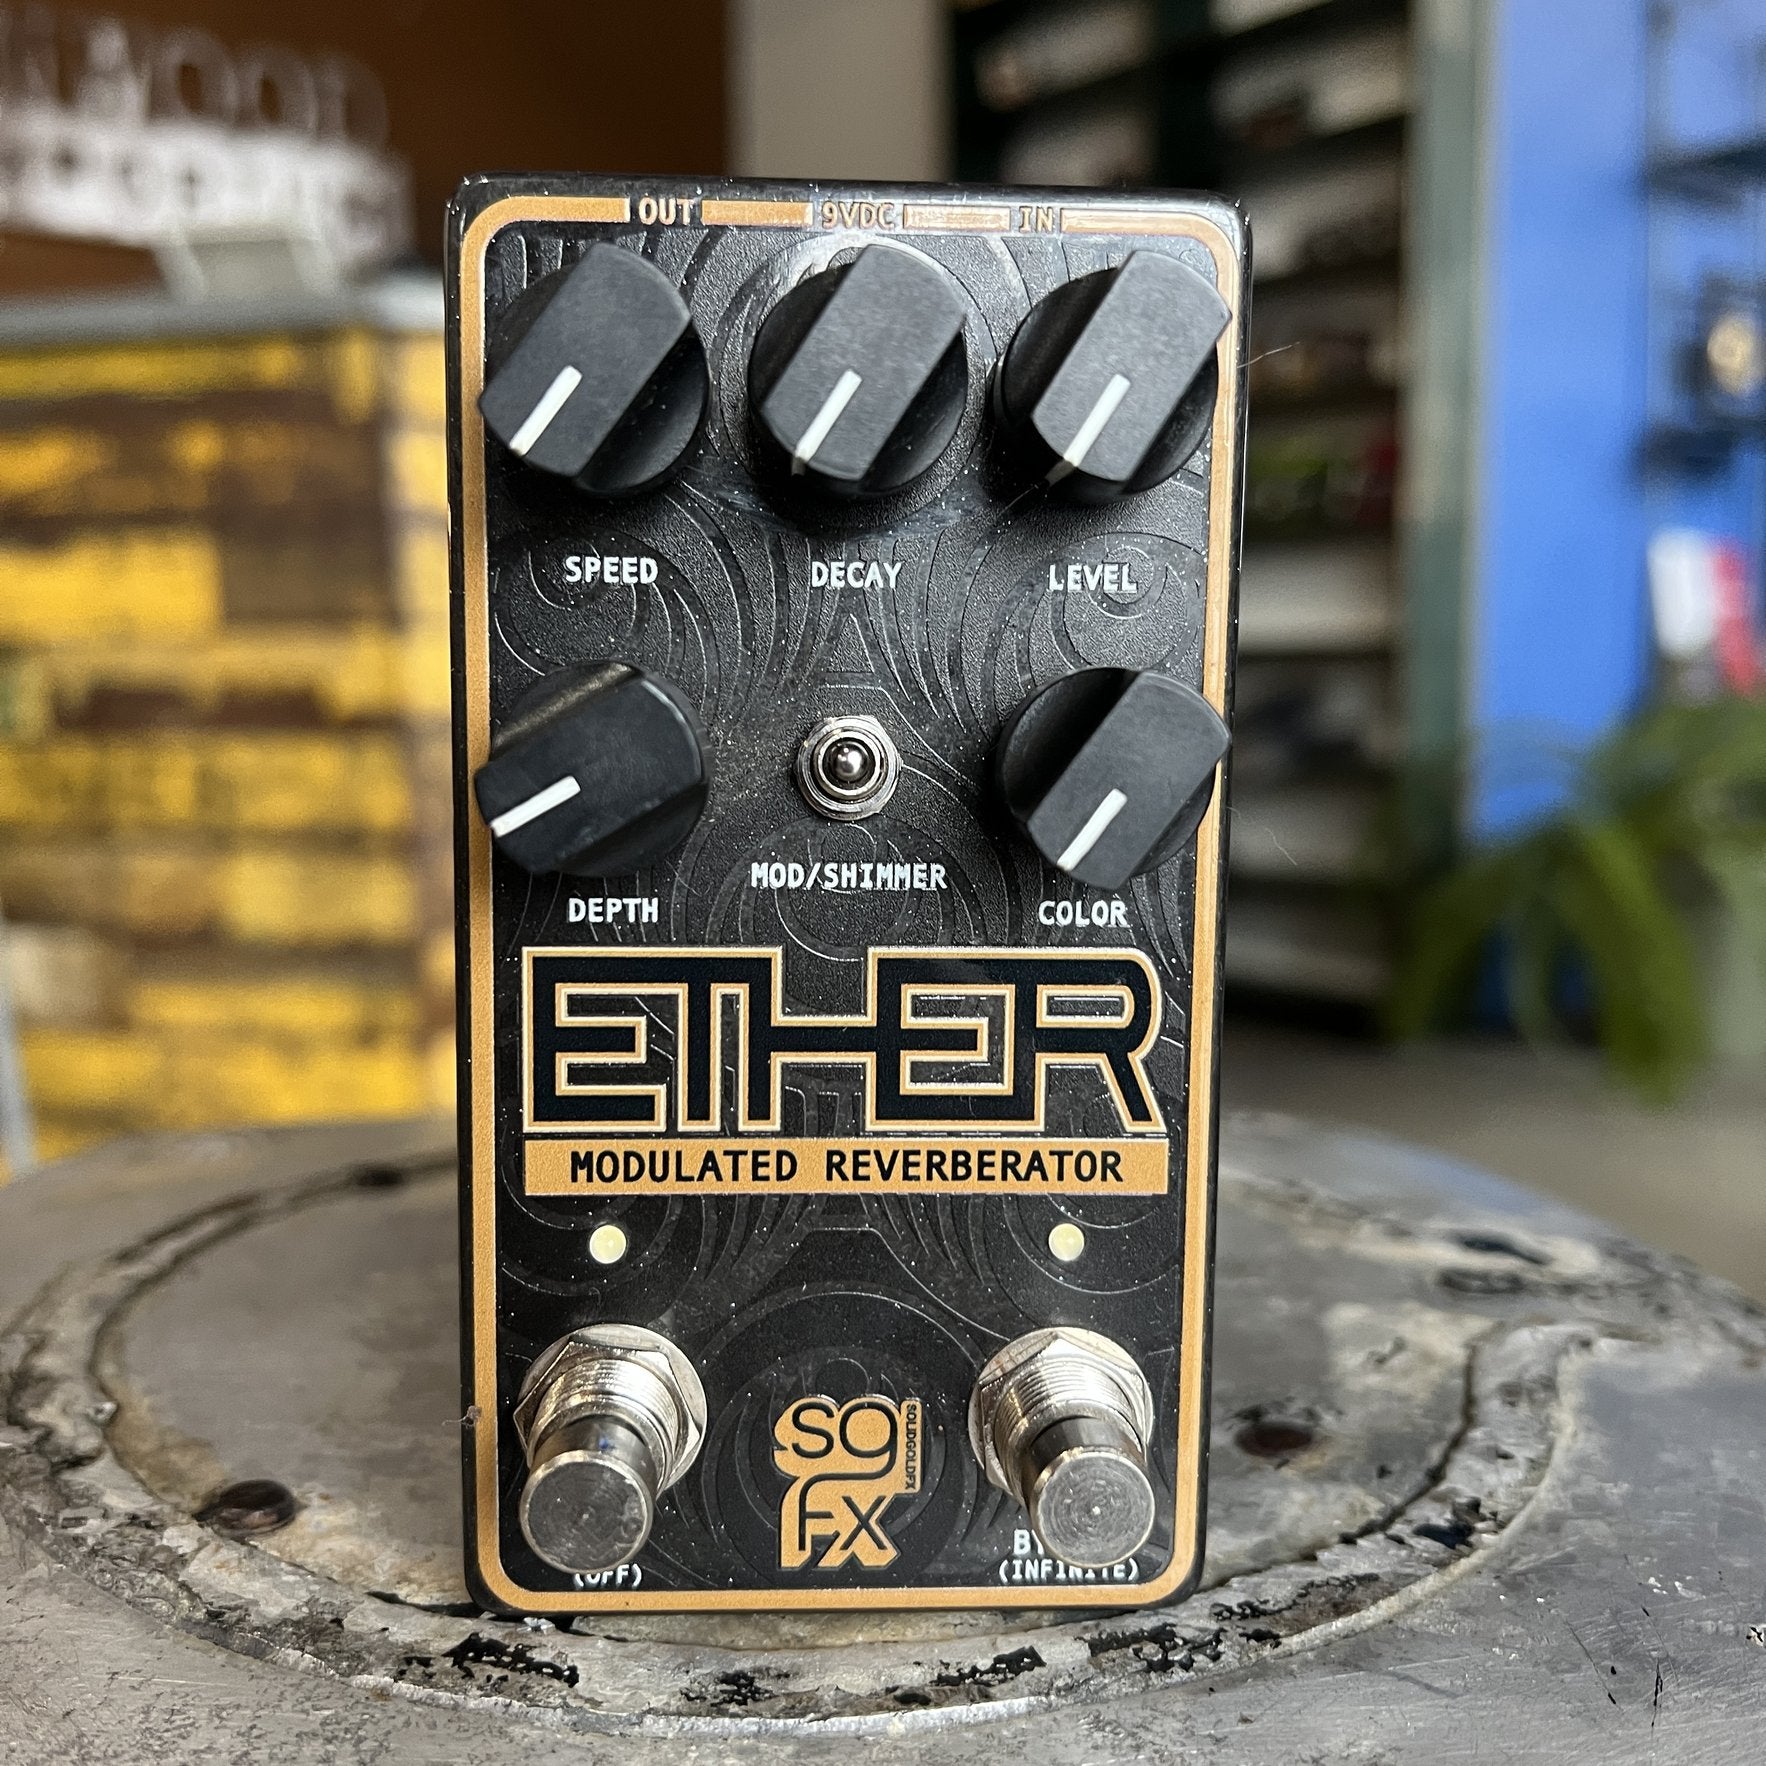 Sold Gold FX Ether Modulated Reverberator